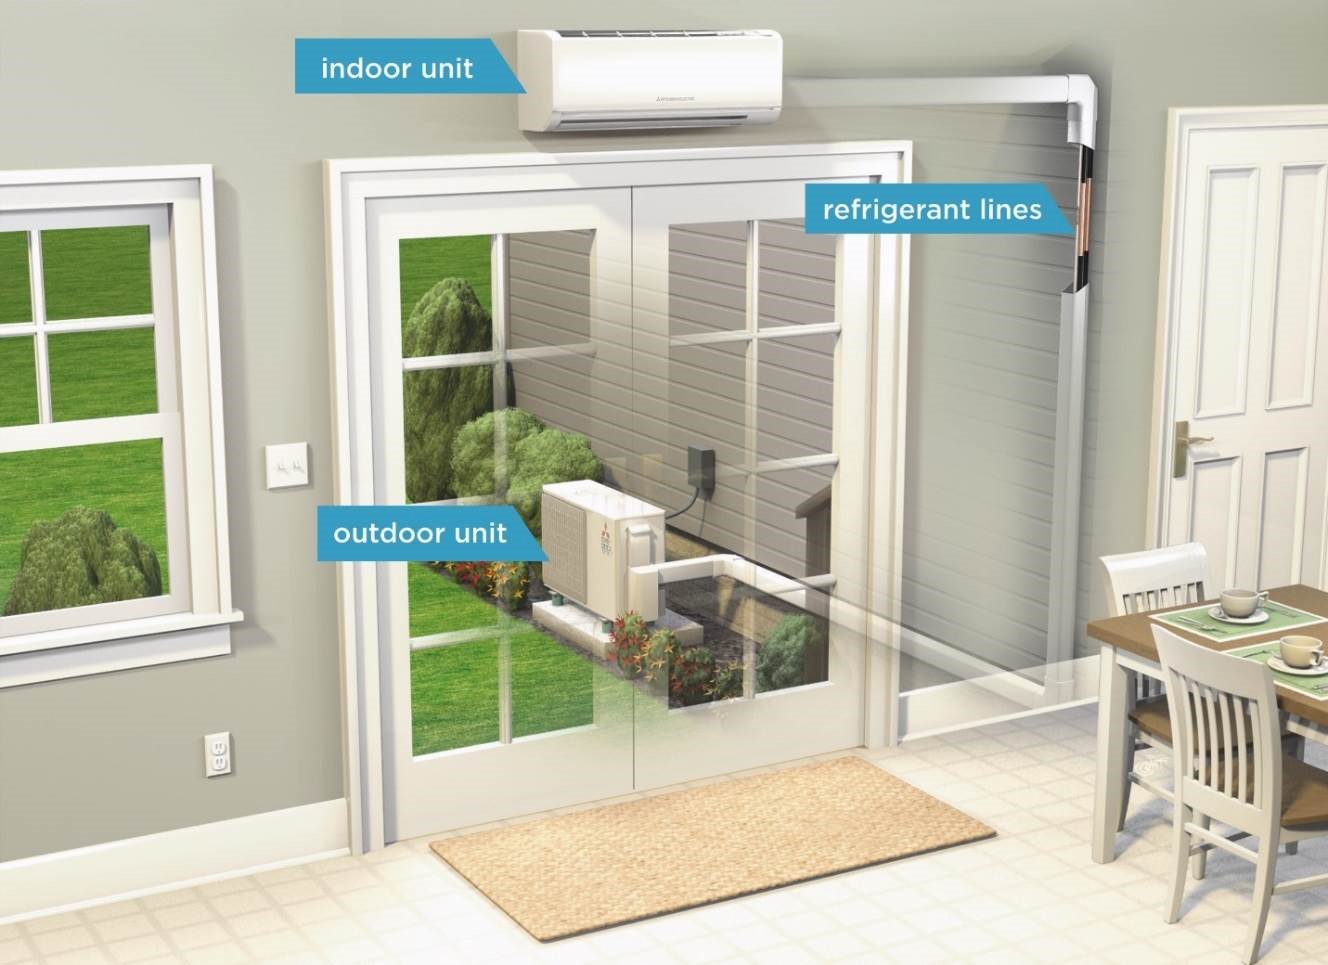 Ductless heeating: Inside unit connected to outside unit through refrigerant lines.